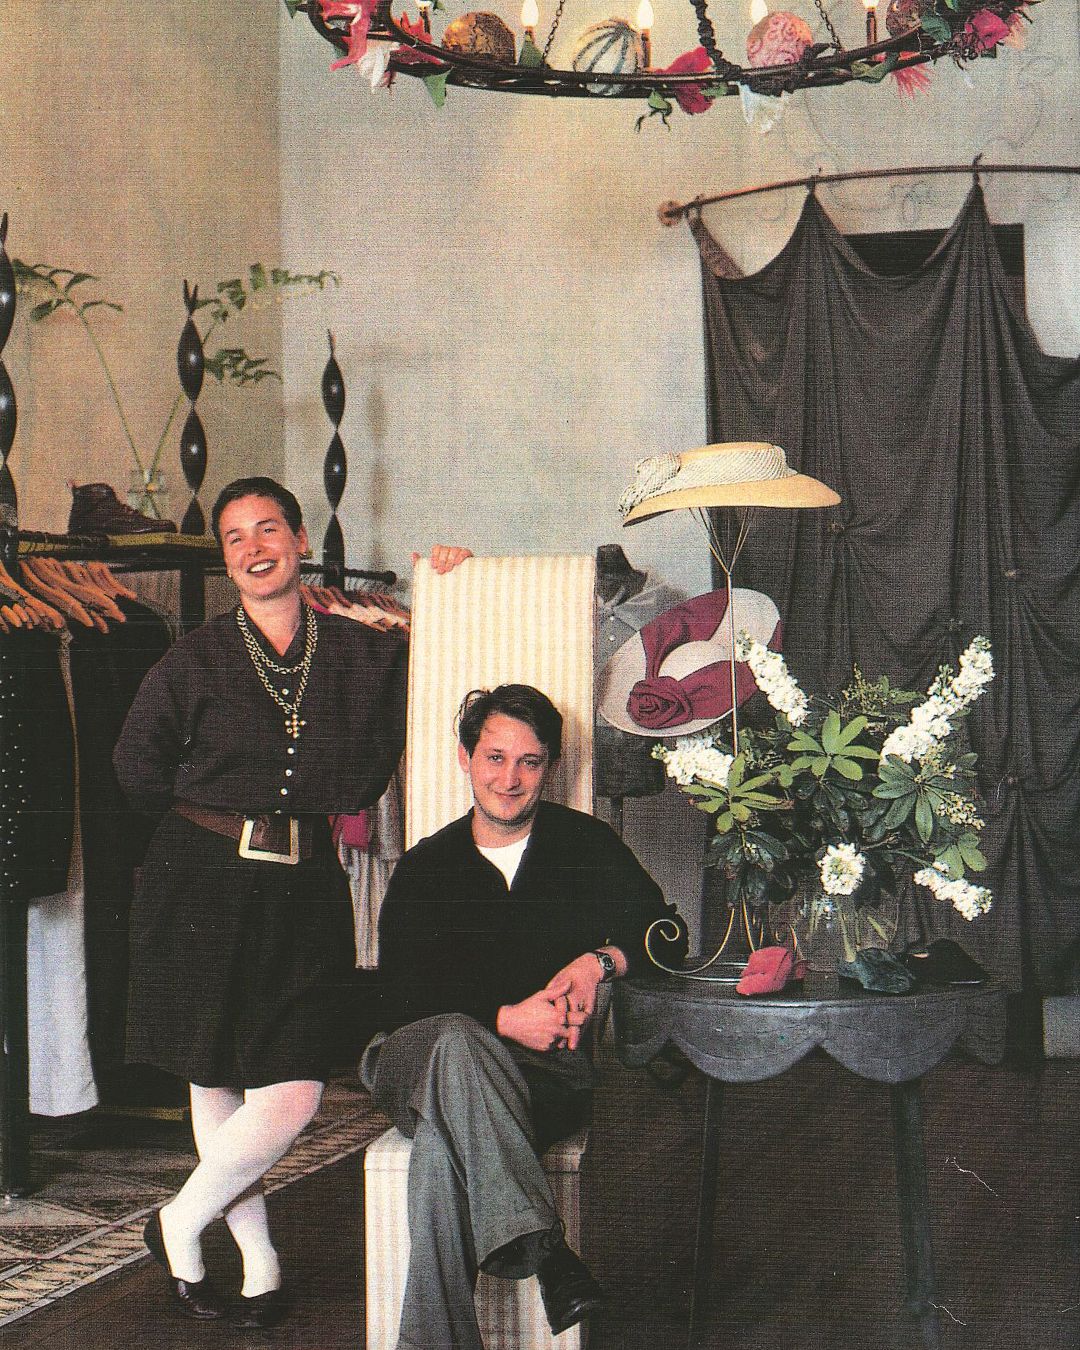 Co-founders Fiona Scanlan and Gary Theodore in their first boutique surrounded by clothing and display of flowers and hats